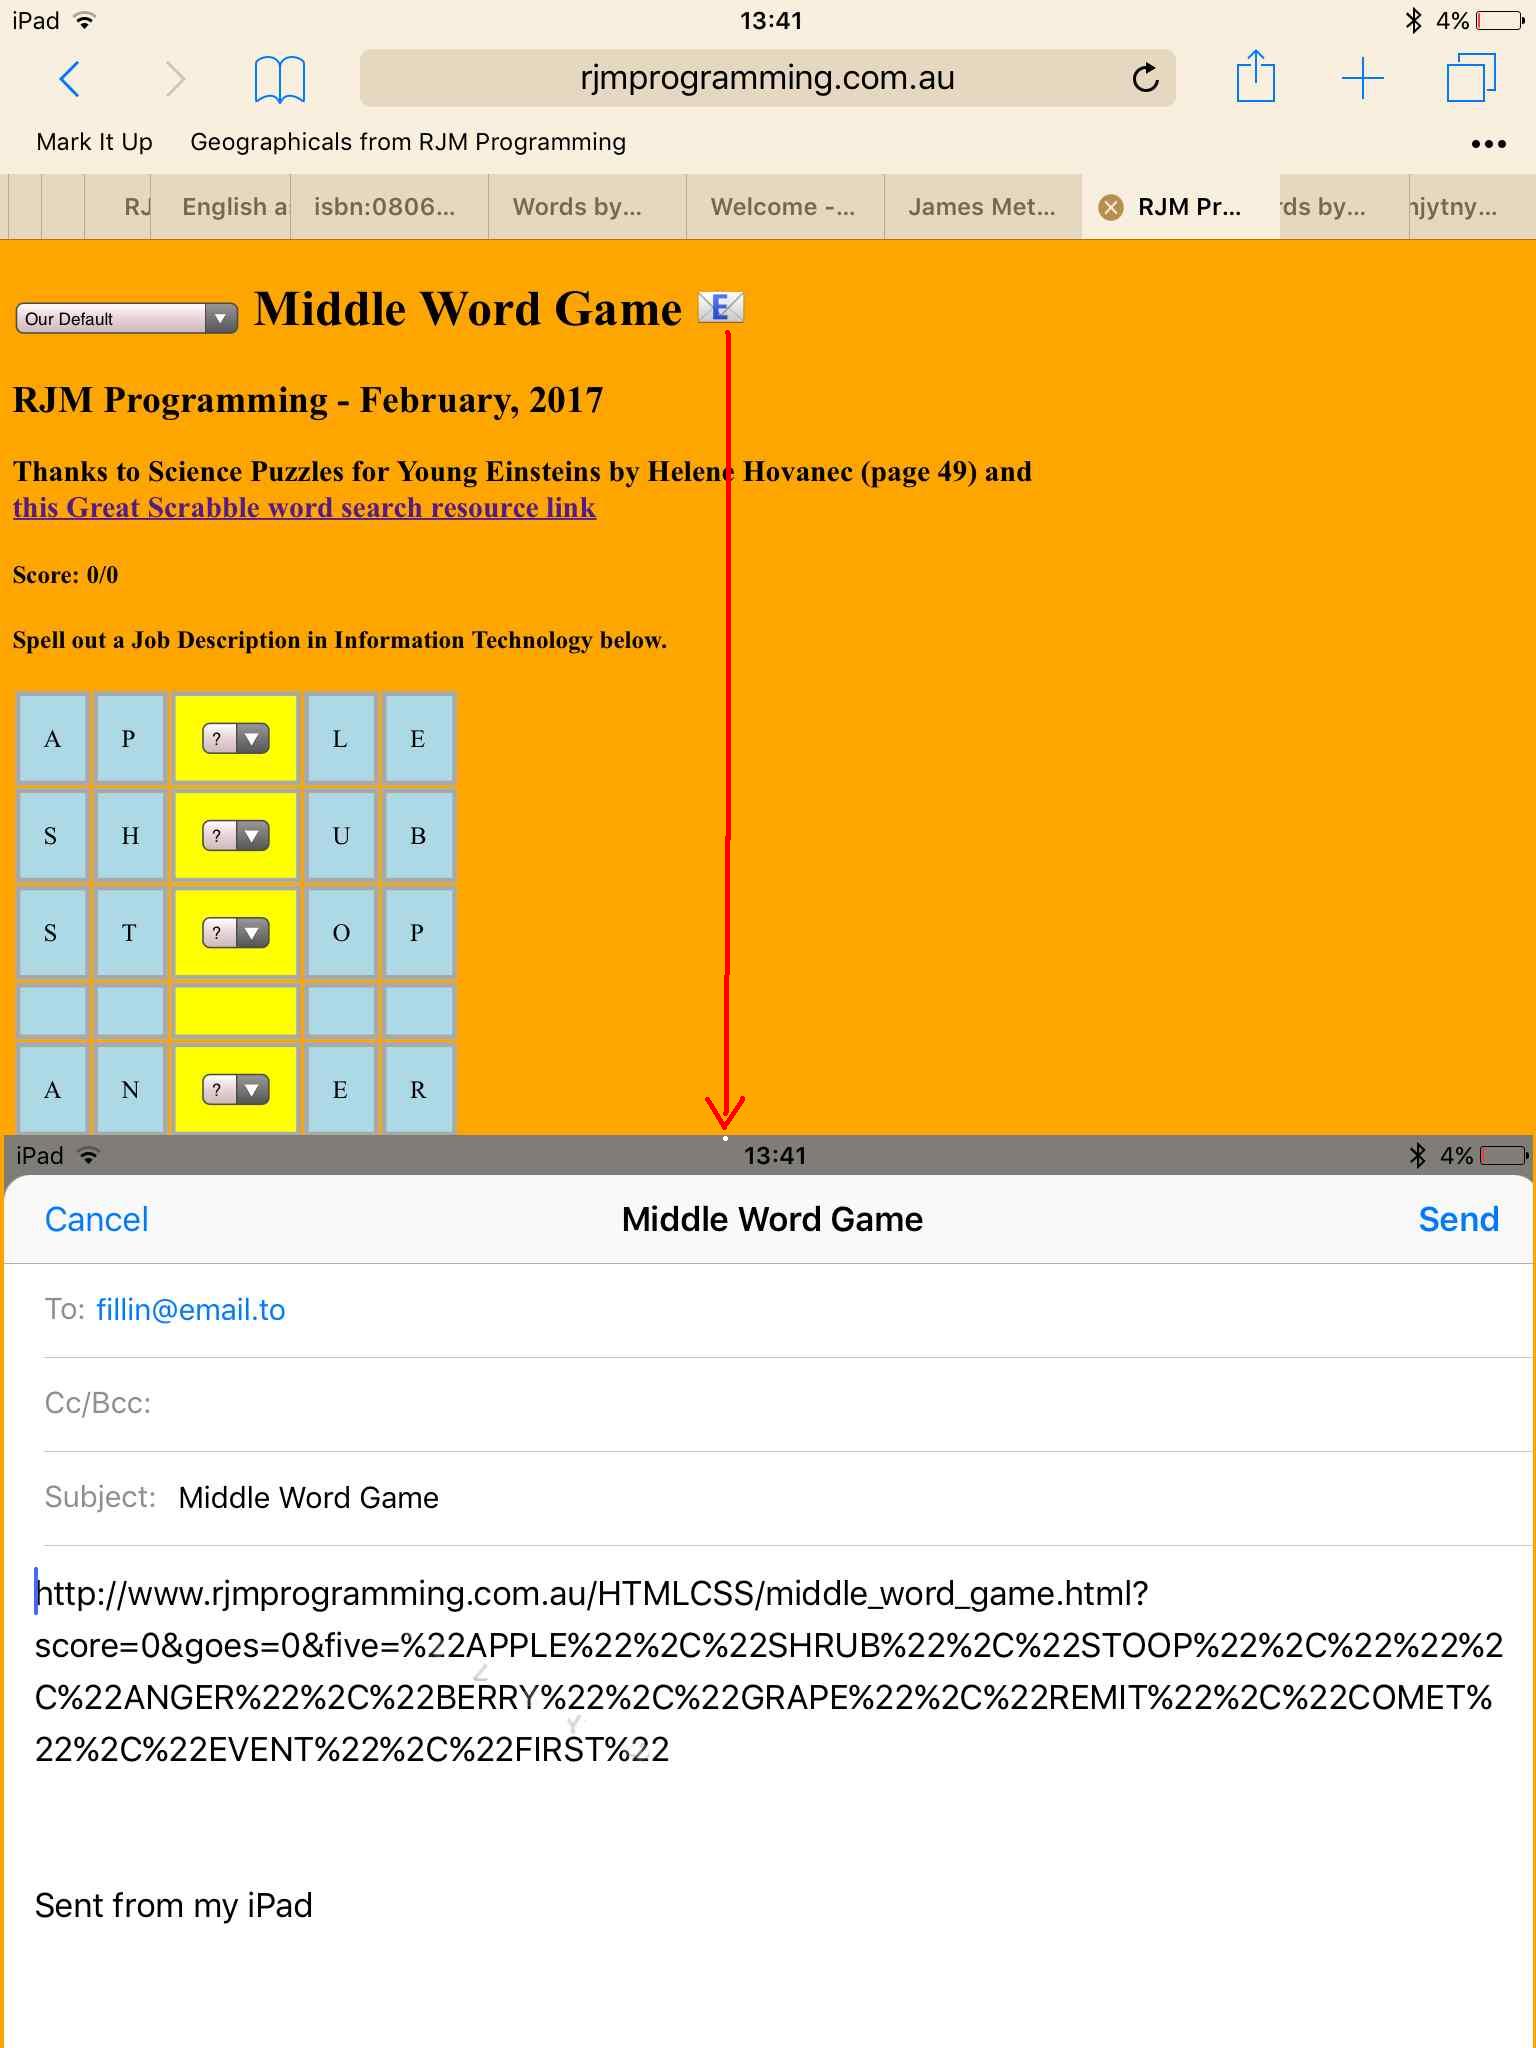 Middle Word Game Share Tutorial